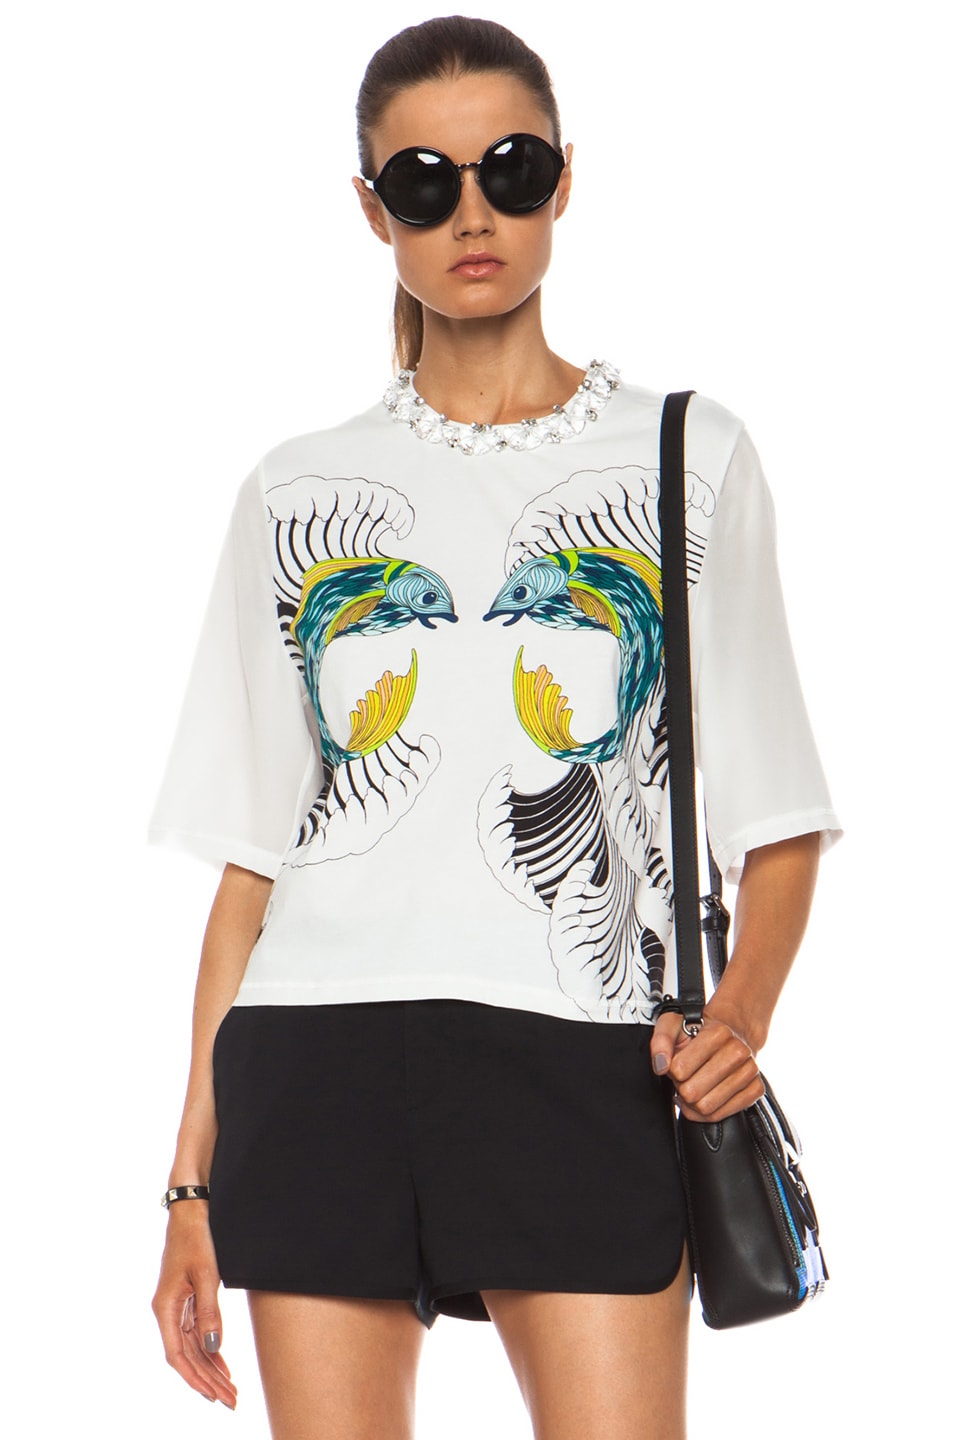 Image 1 of 3.1 phillip lim Animal Kingdom Cotton Tee with Embellished Neckline in Antique White